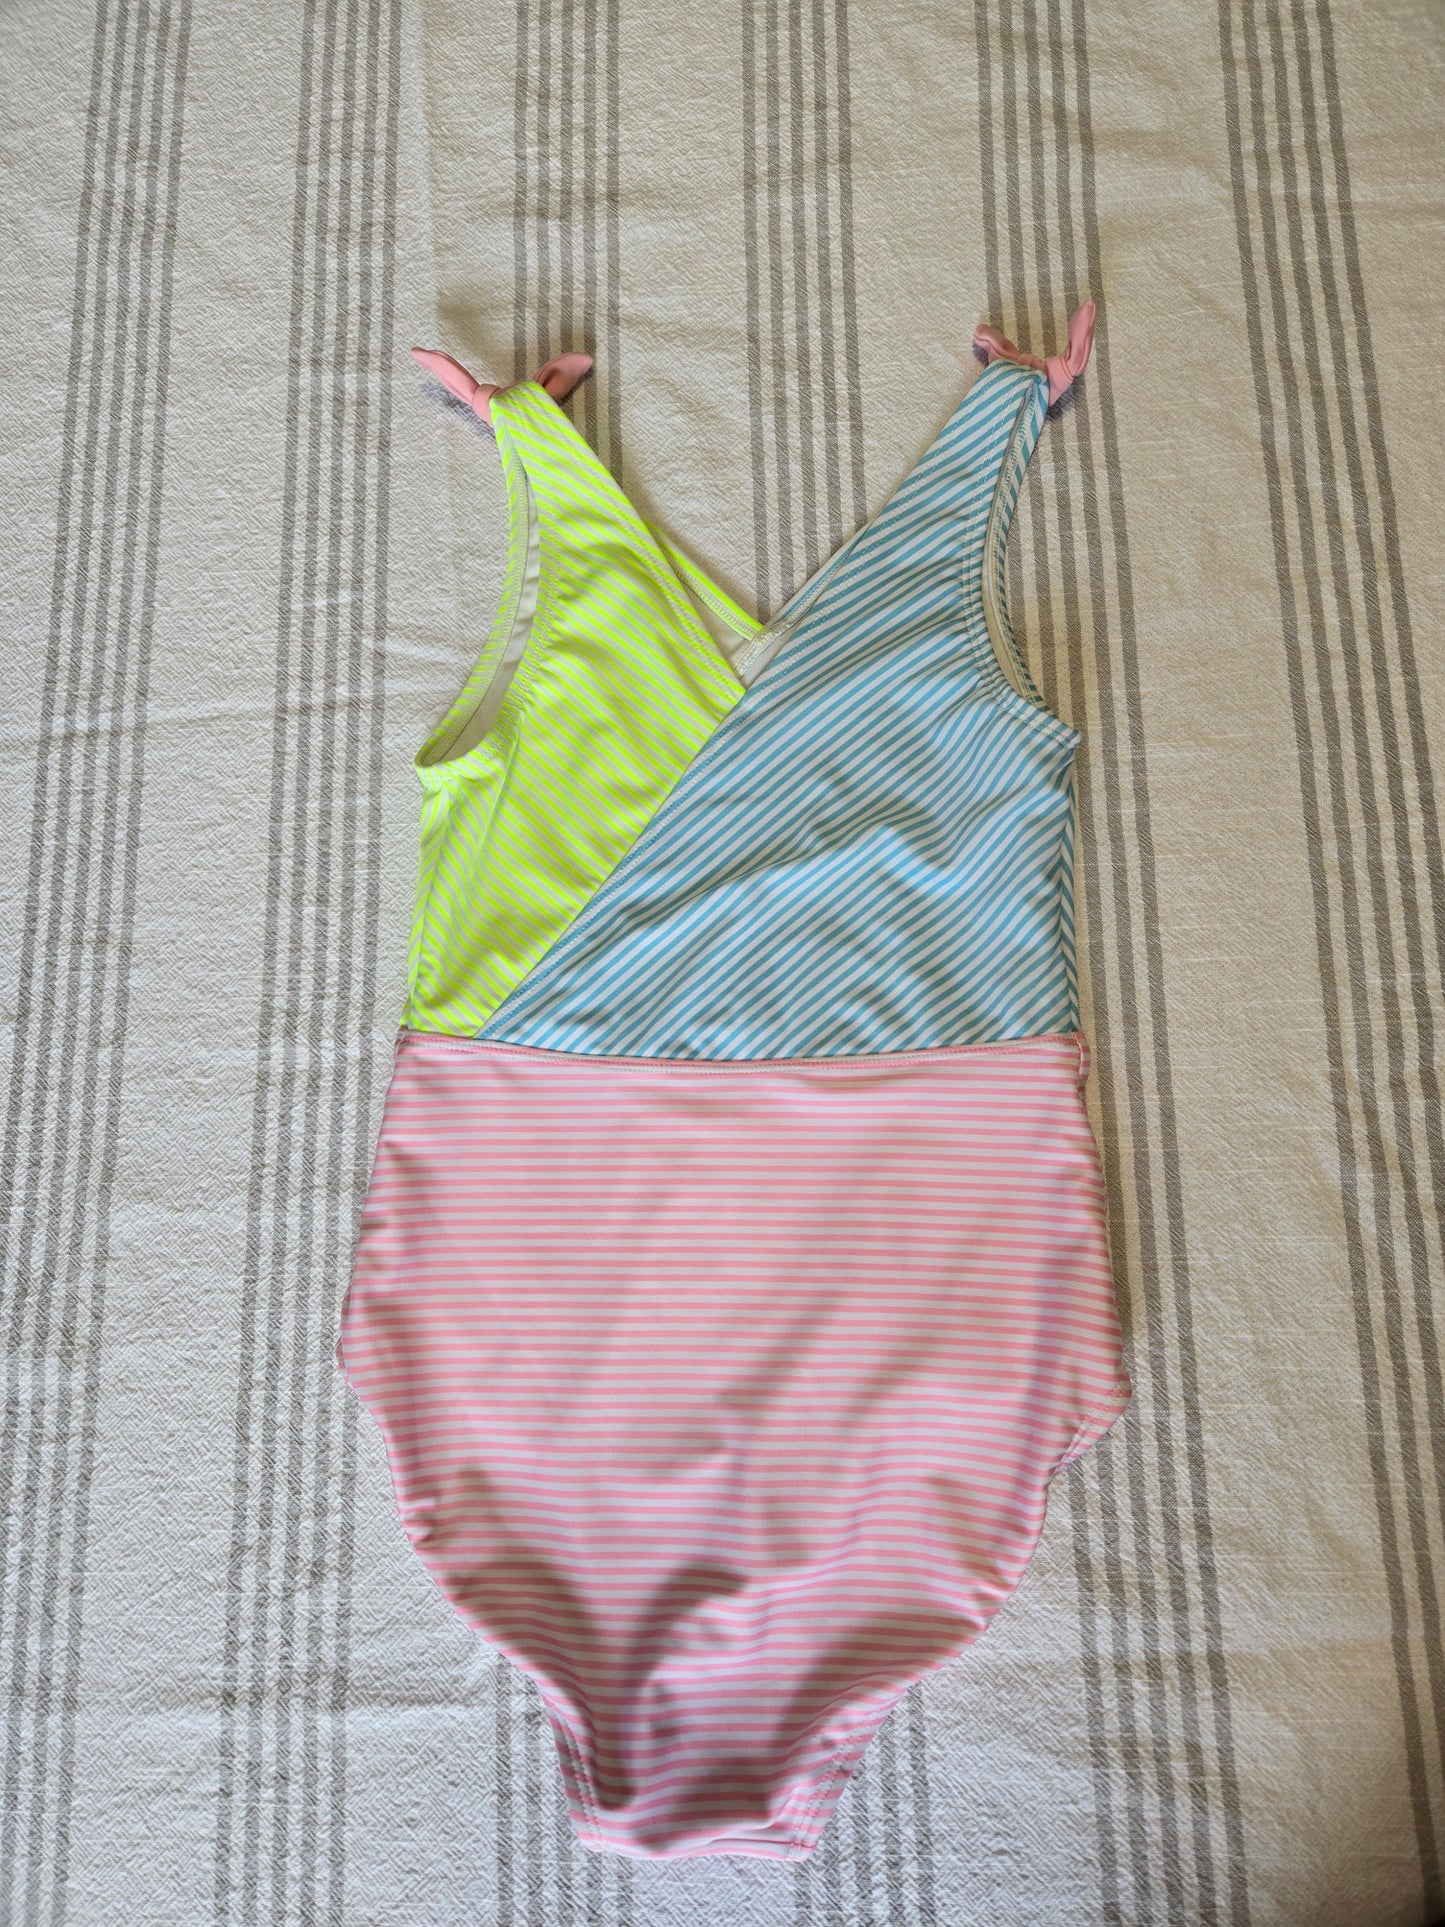 Girls Pink Green Blue Swimsuit Size Large 10 12 PPU Montgomery